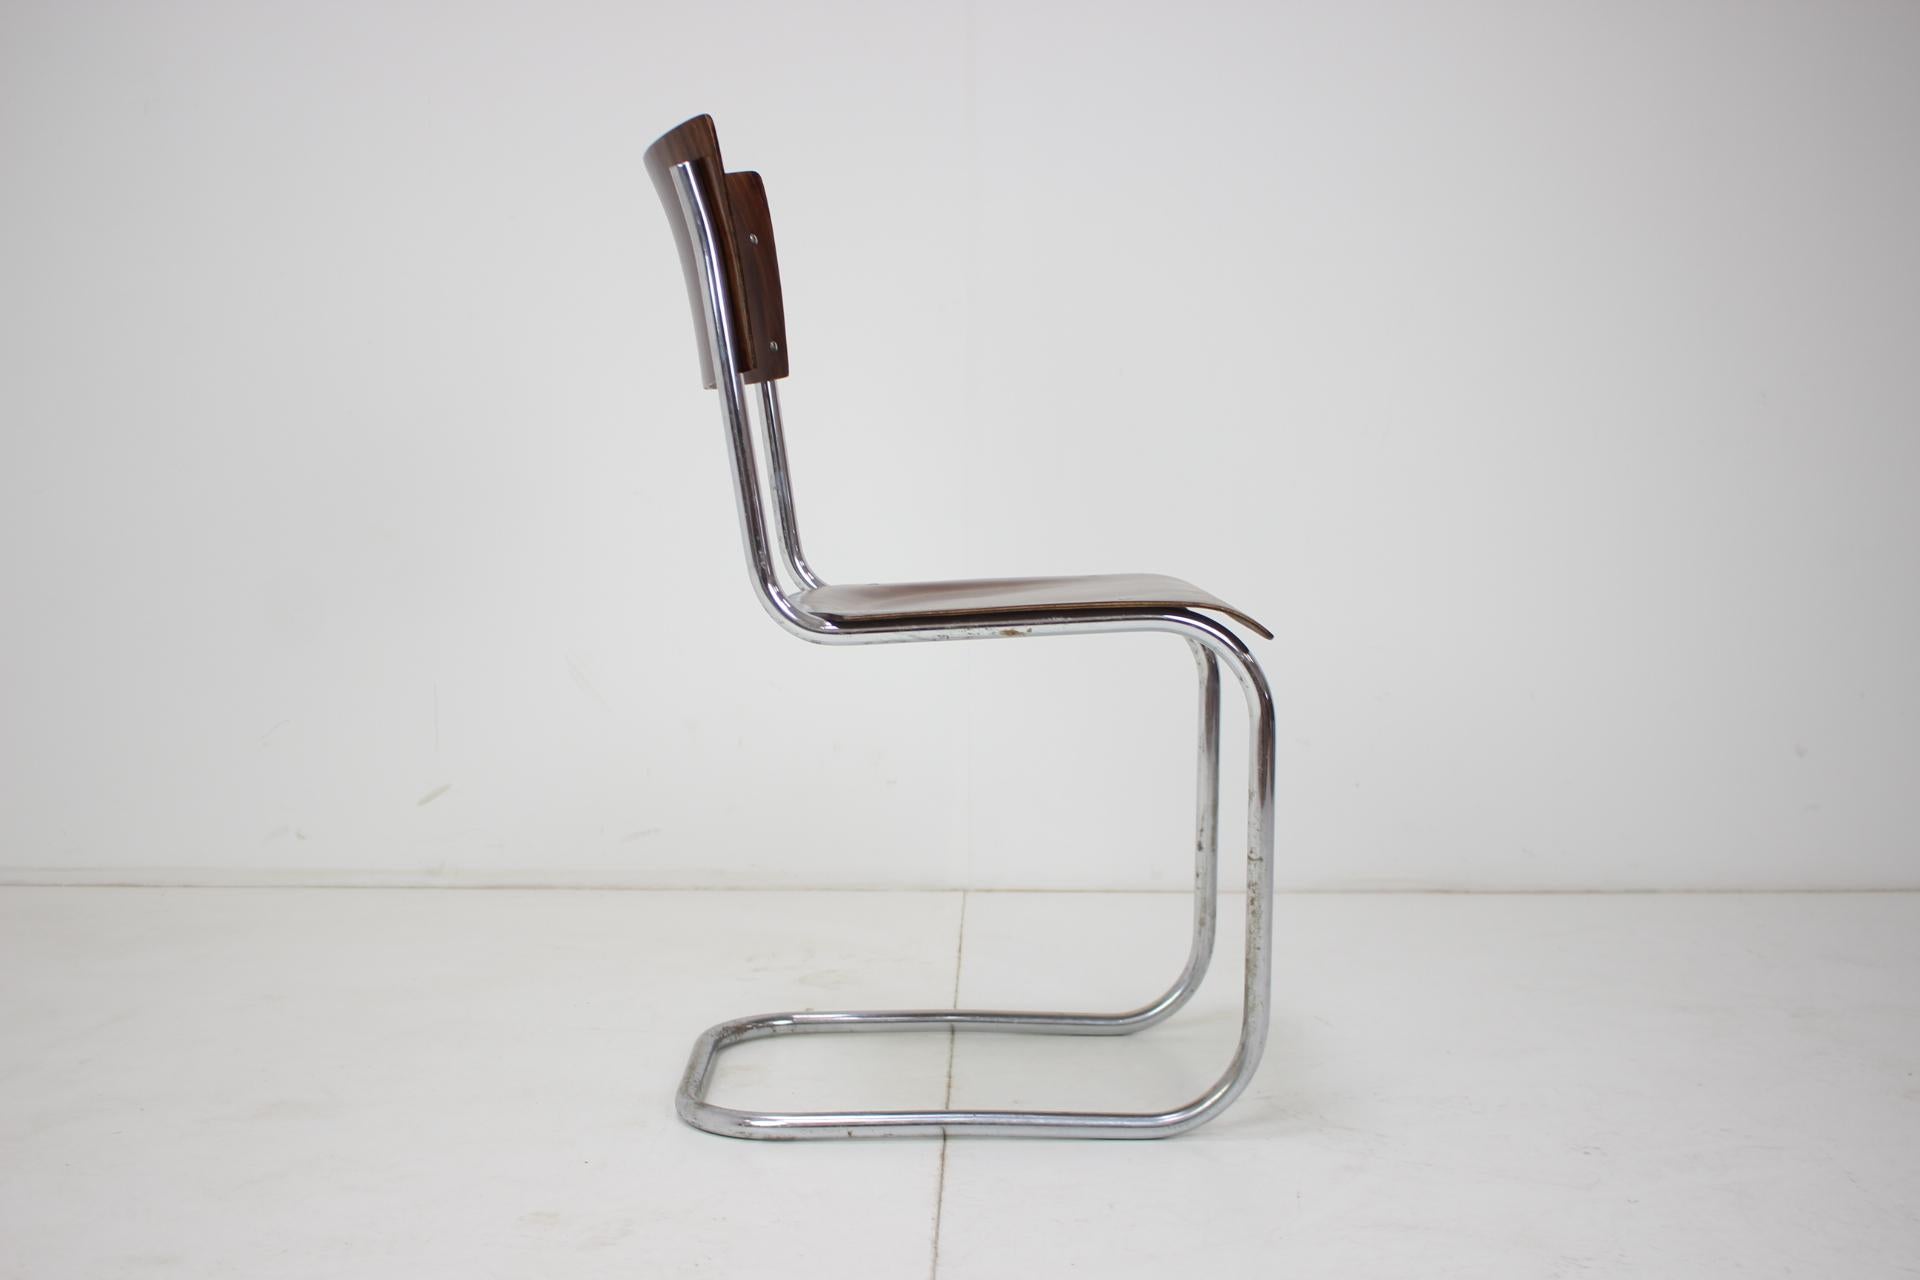 Art Deco Chair Designed by Mart Stam, Type s10, 1930's For Sale 1